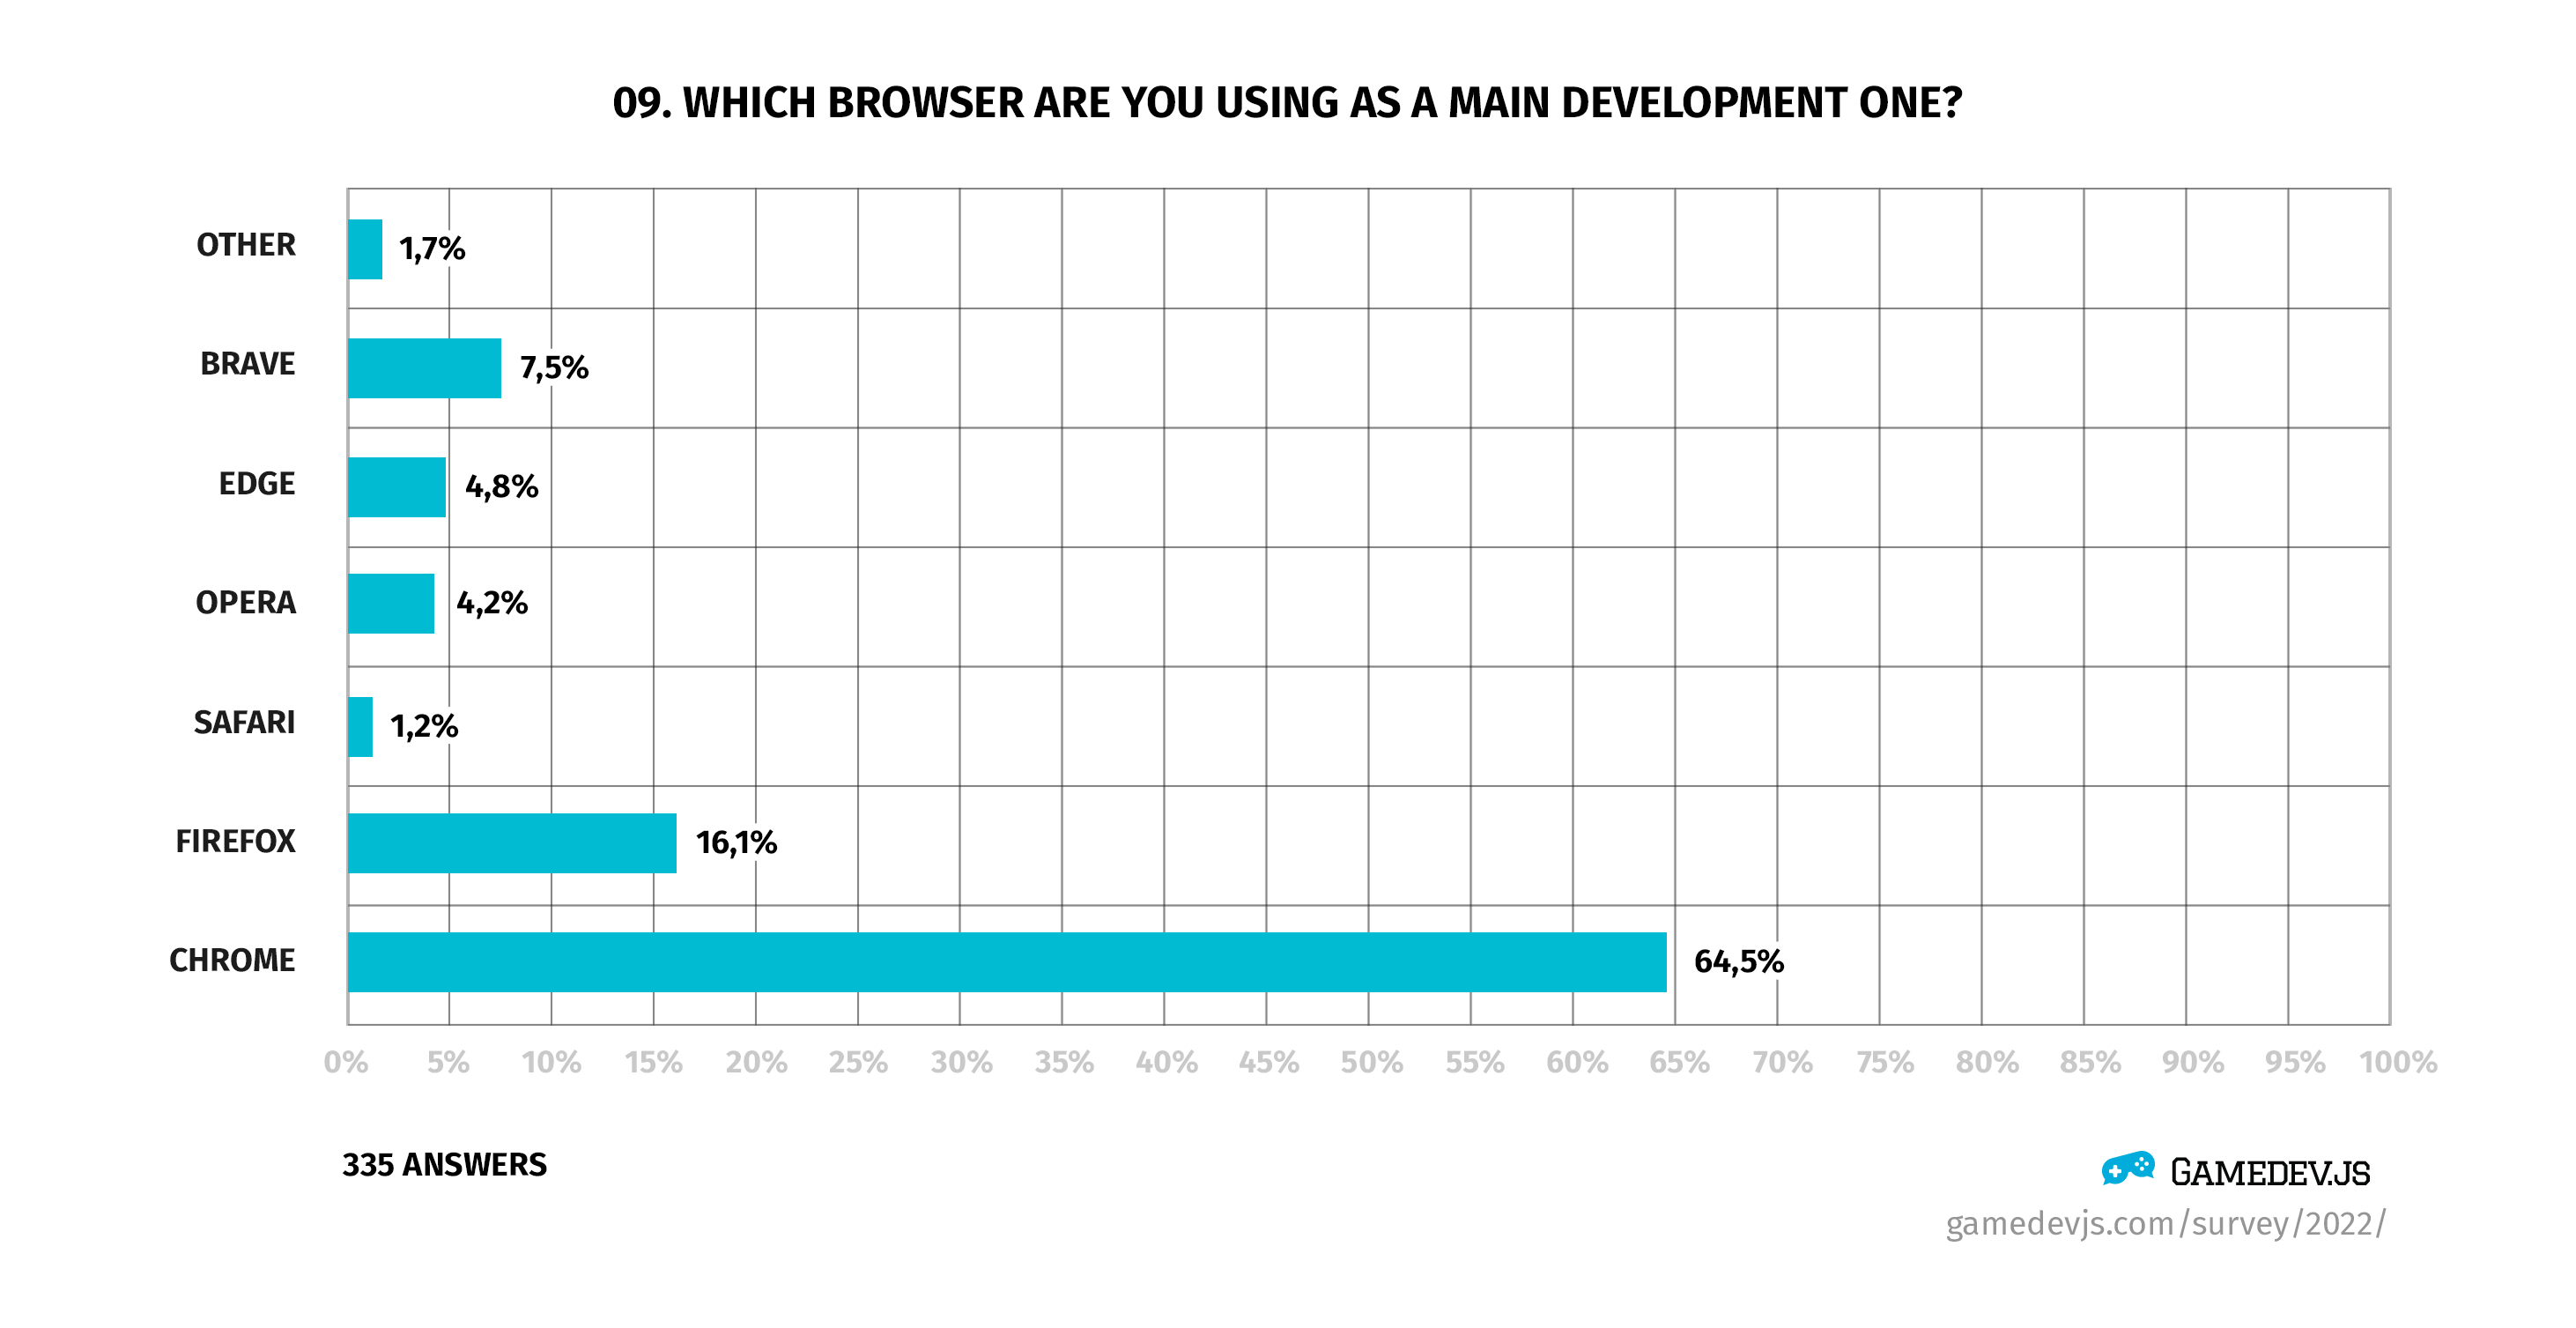 Gamedev.js Survey 2022 - Question #9: Which browser are you using as a main development one?